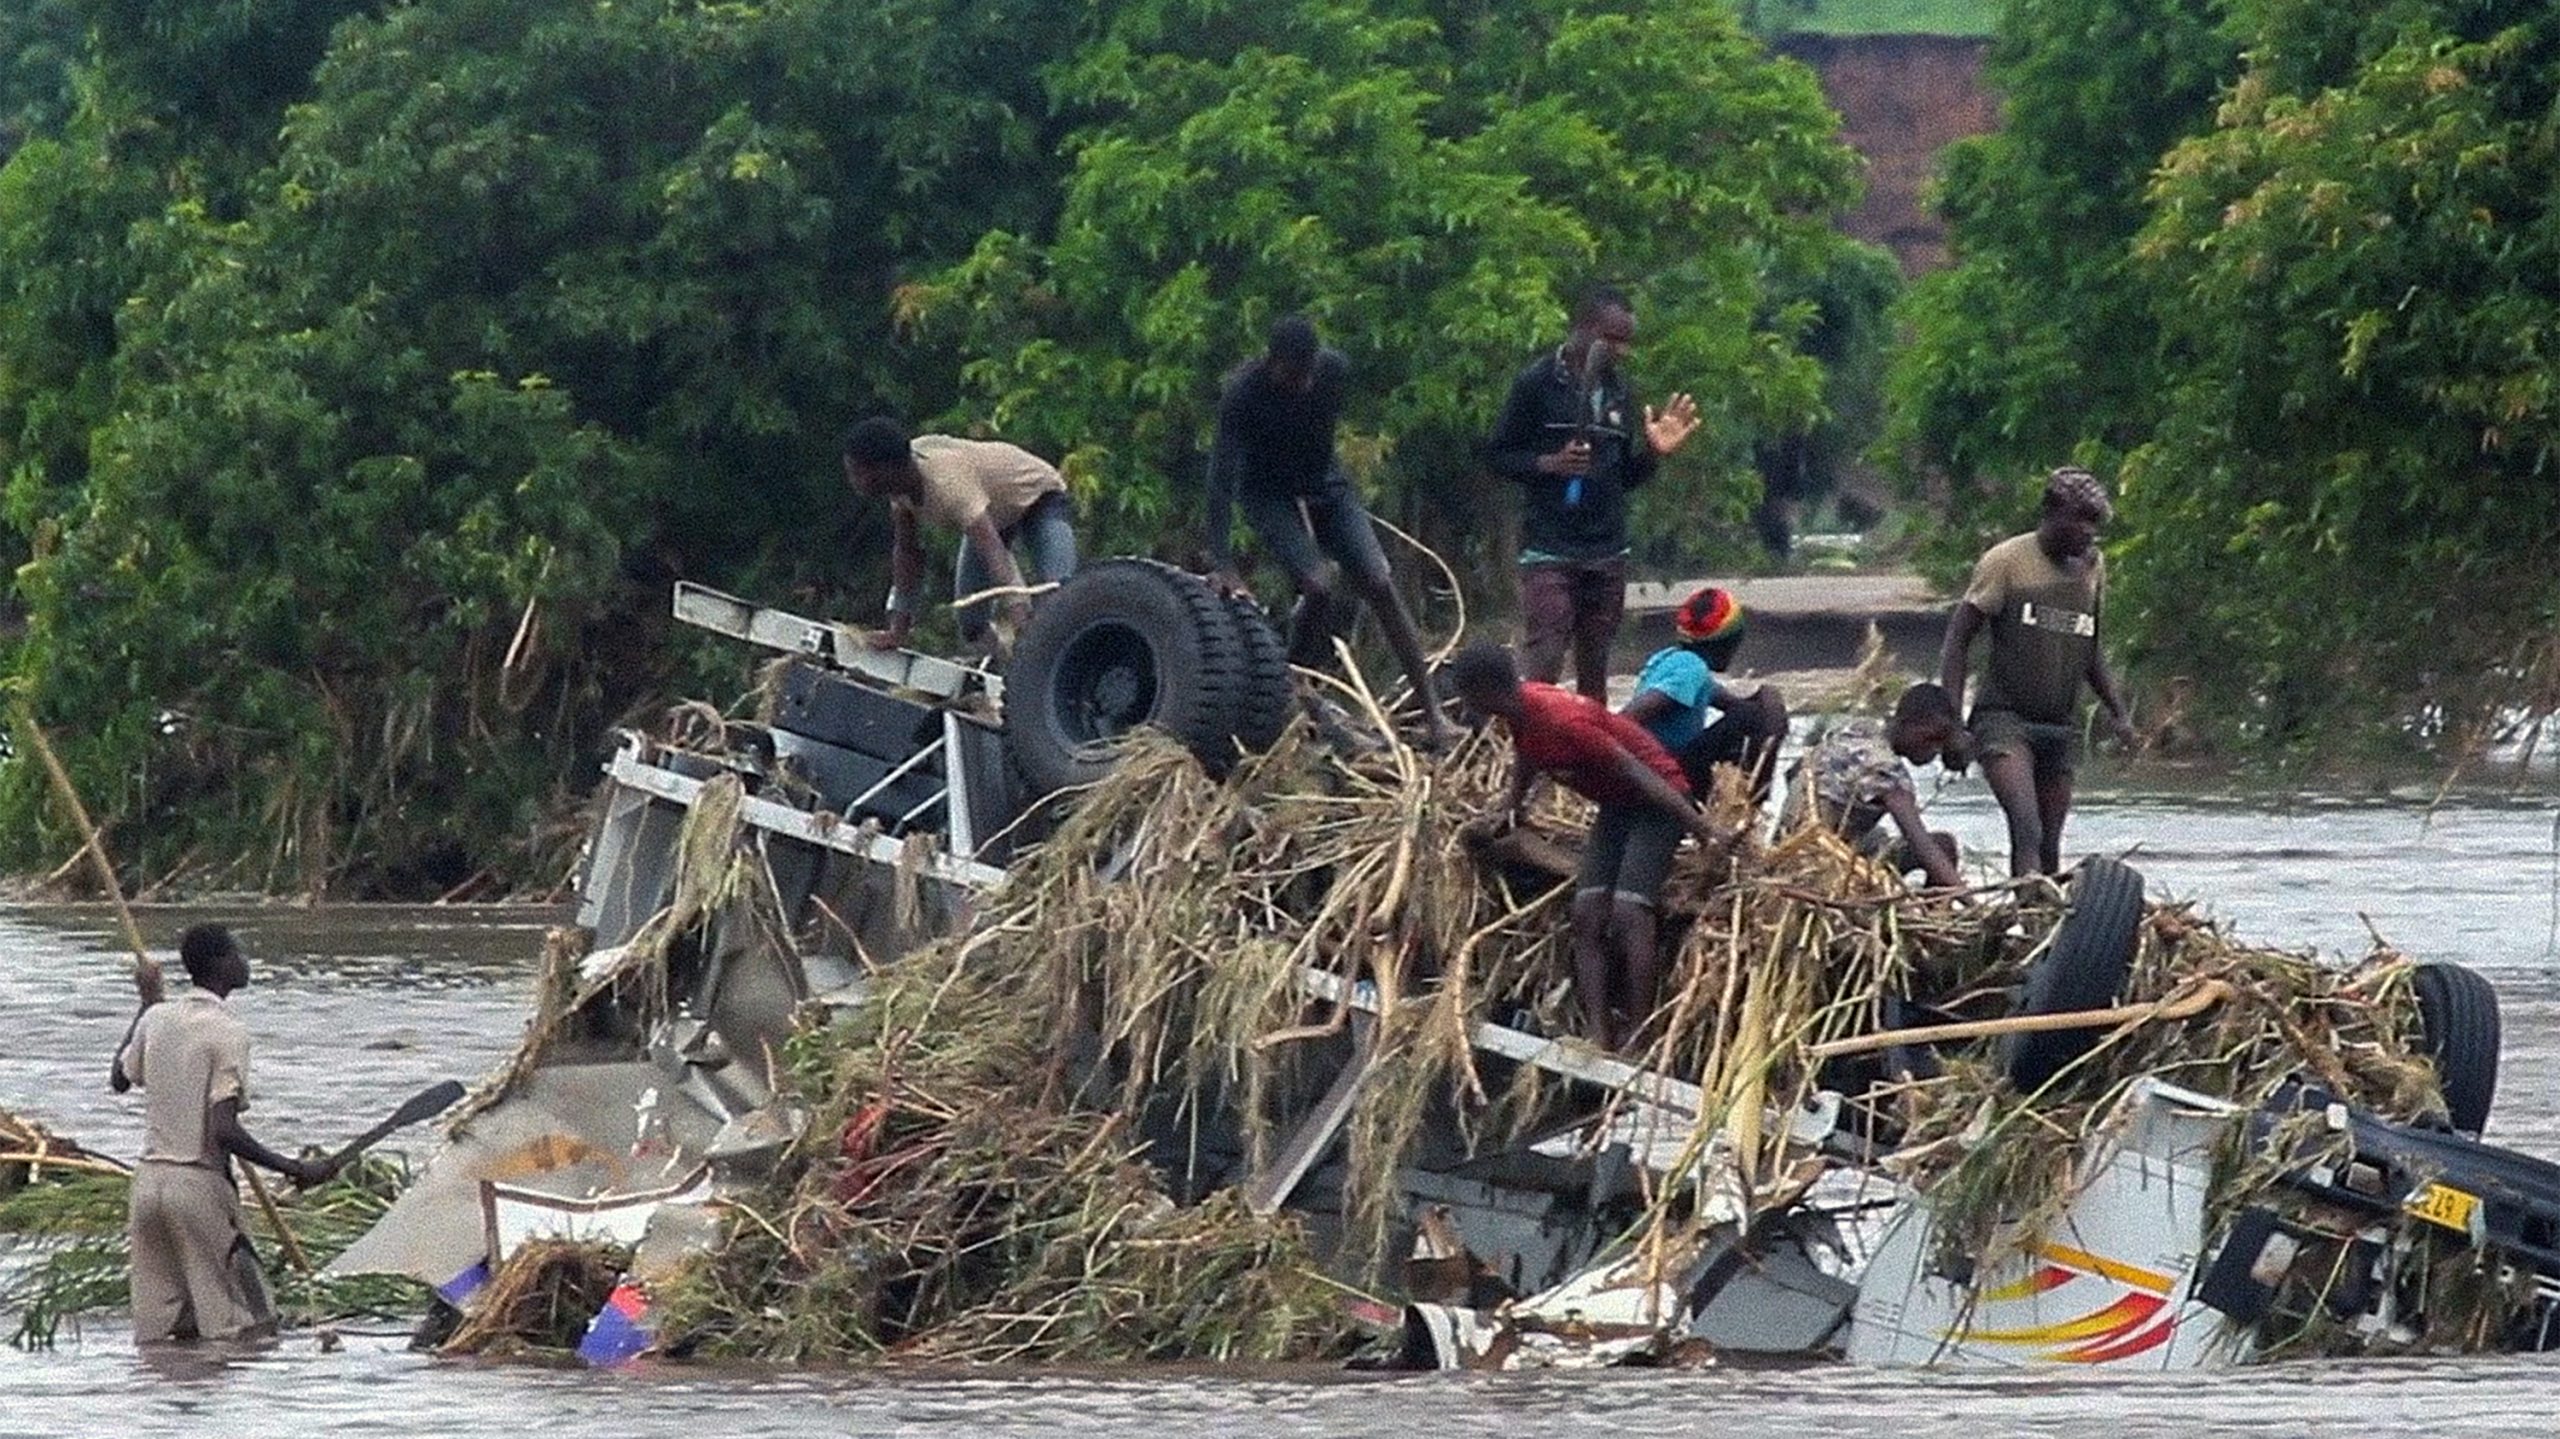 FILE - In this image made from video, people stand on an overturned vehicle swept by flooding water...